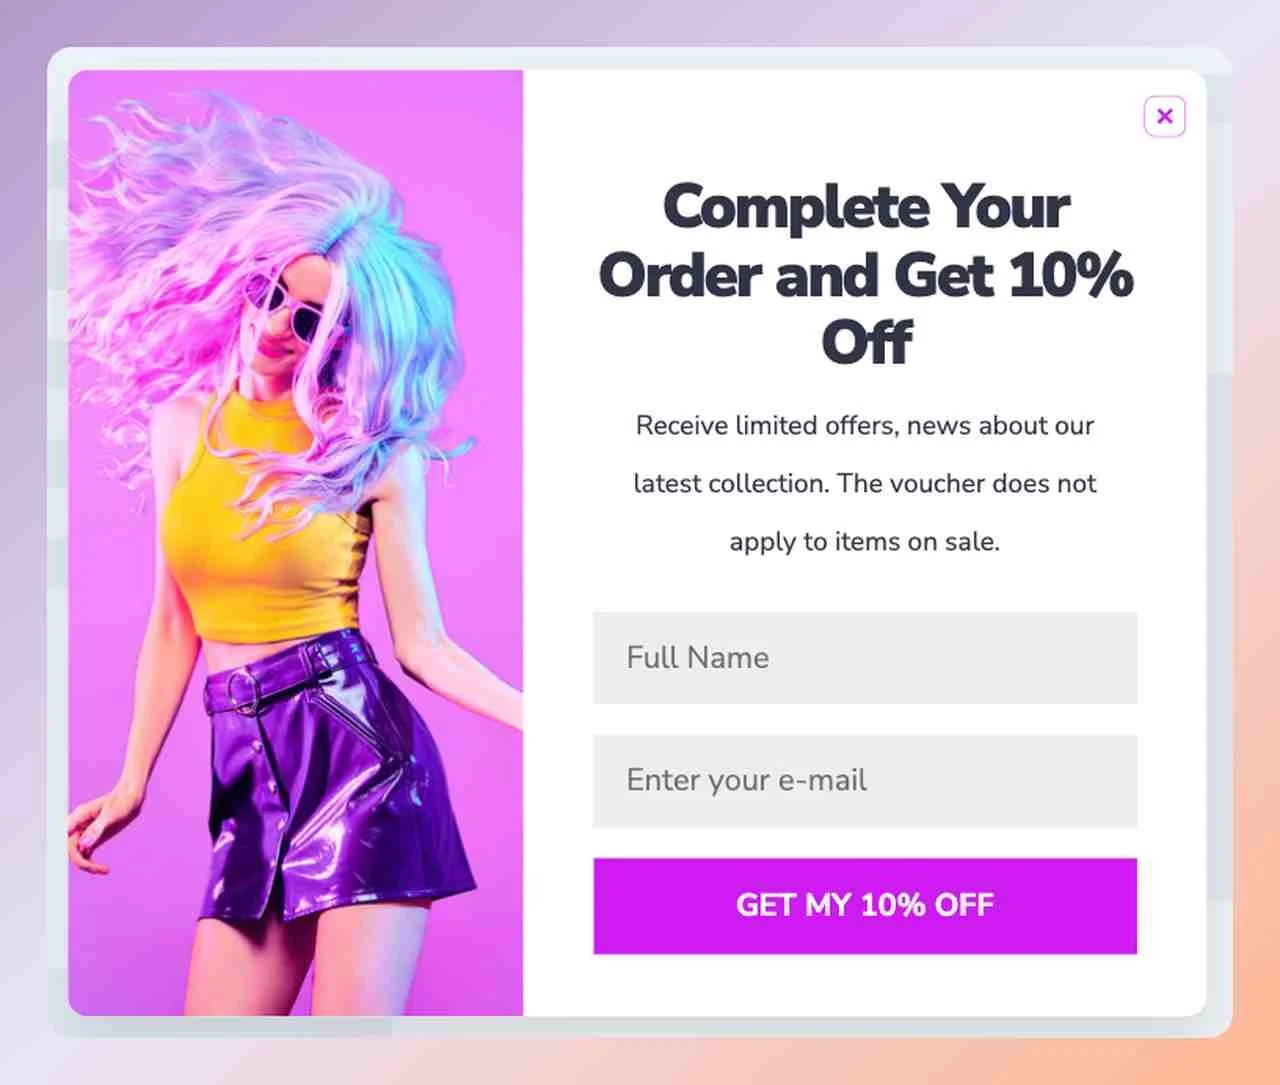 a cart abandonment popup example from Popupsmart that shows a girl with purple hair very happy jumpping and a text that says "Complete Your
Order and Get 10% Off"